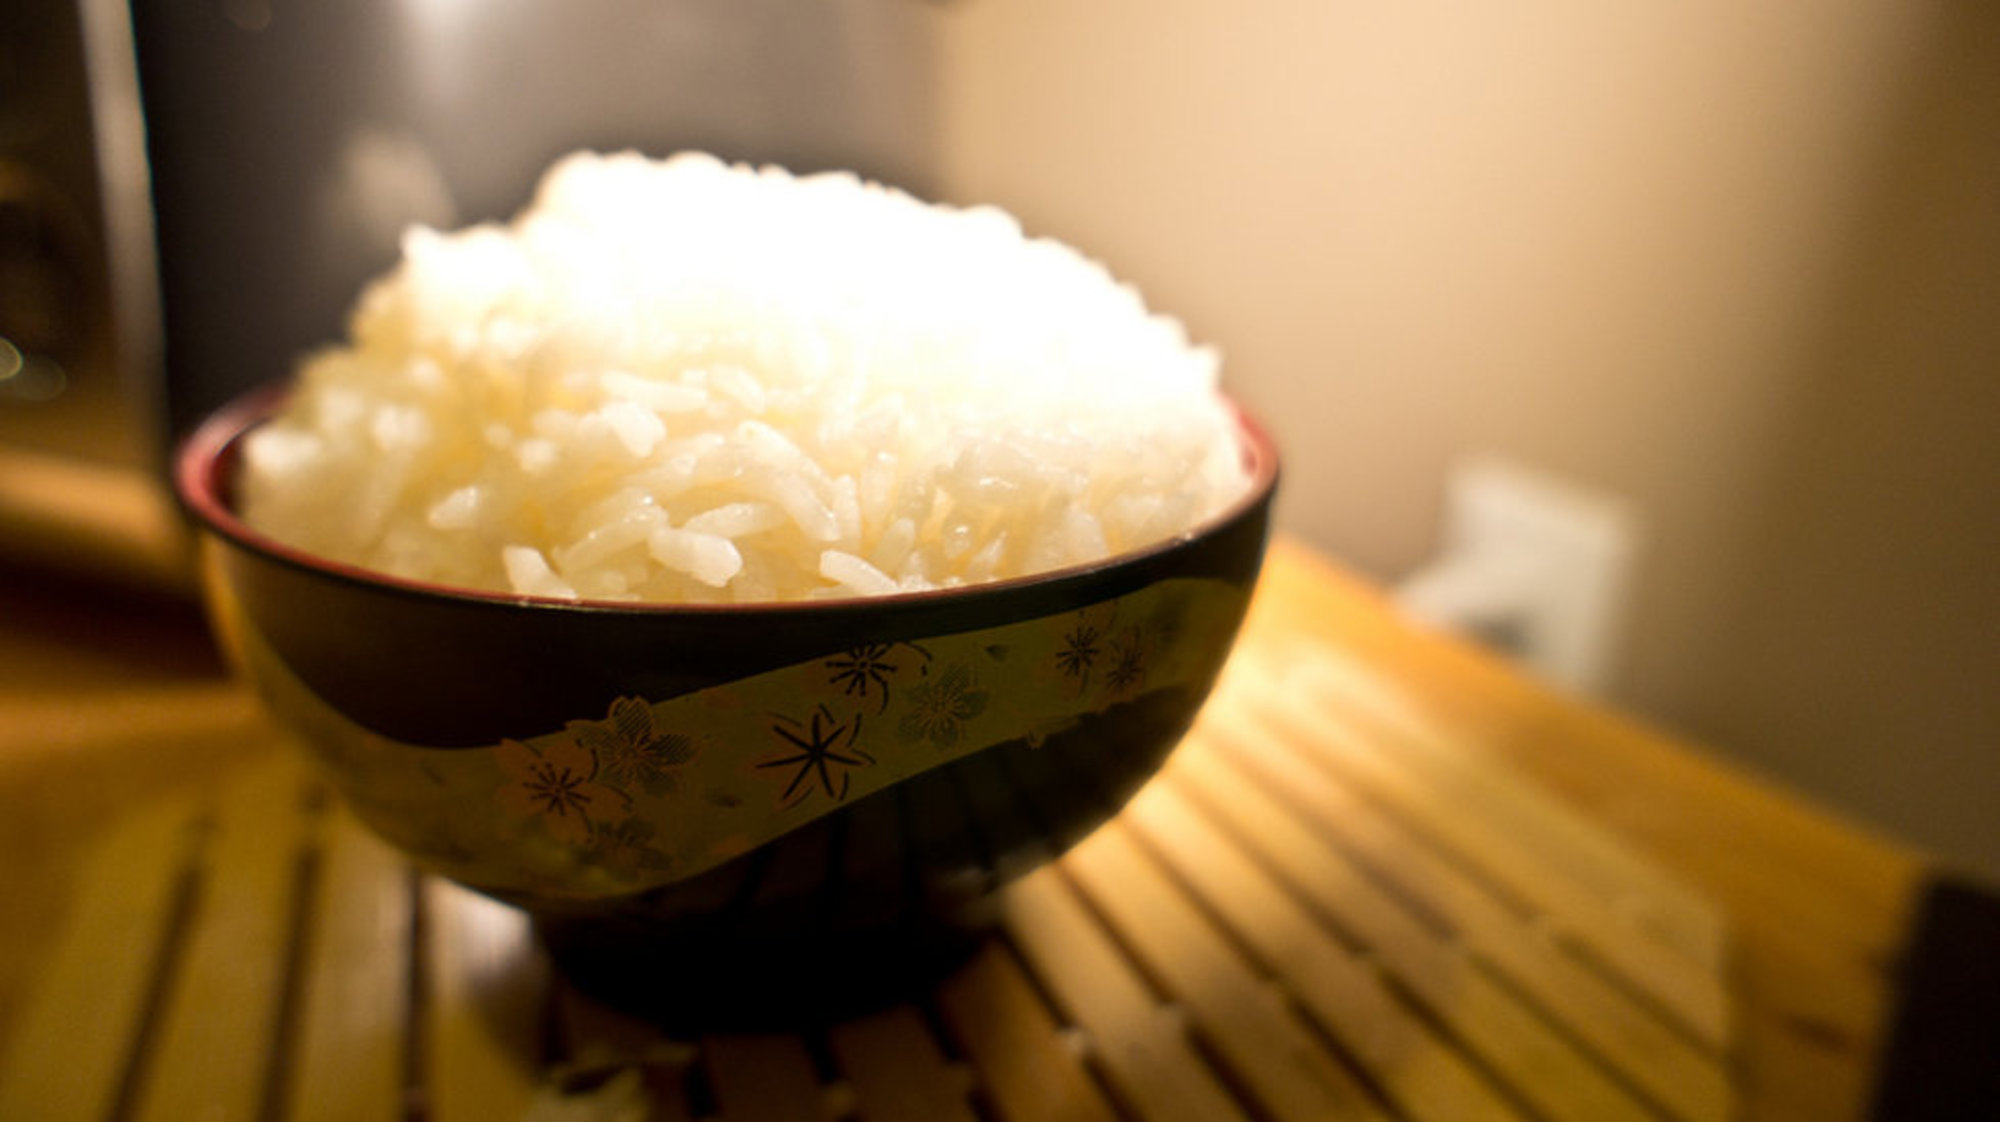 TIPS TO STORE LEFTOVER RICE